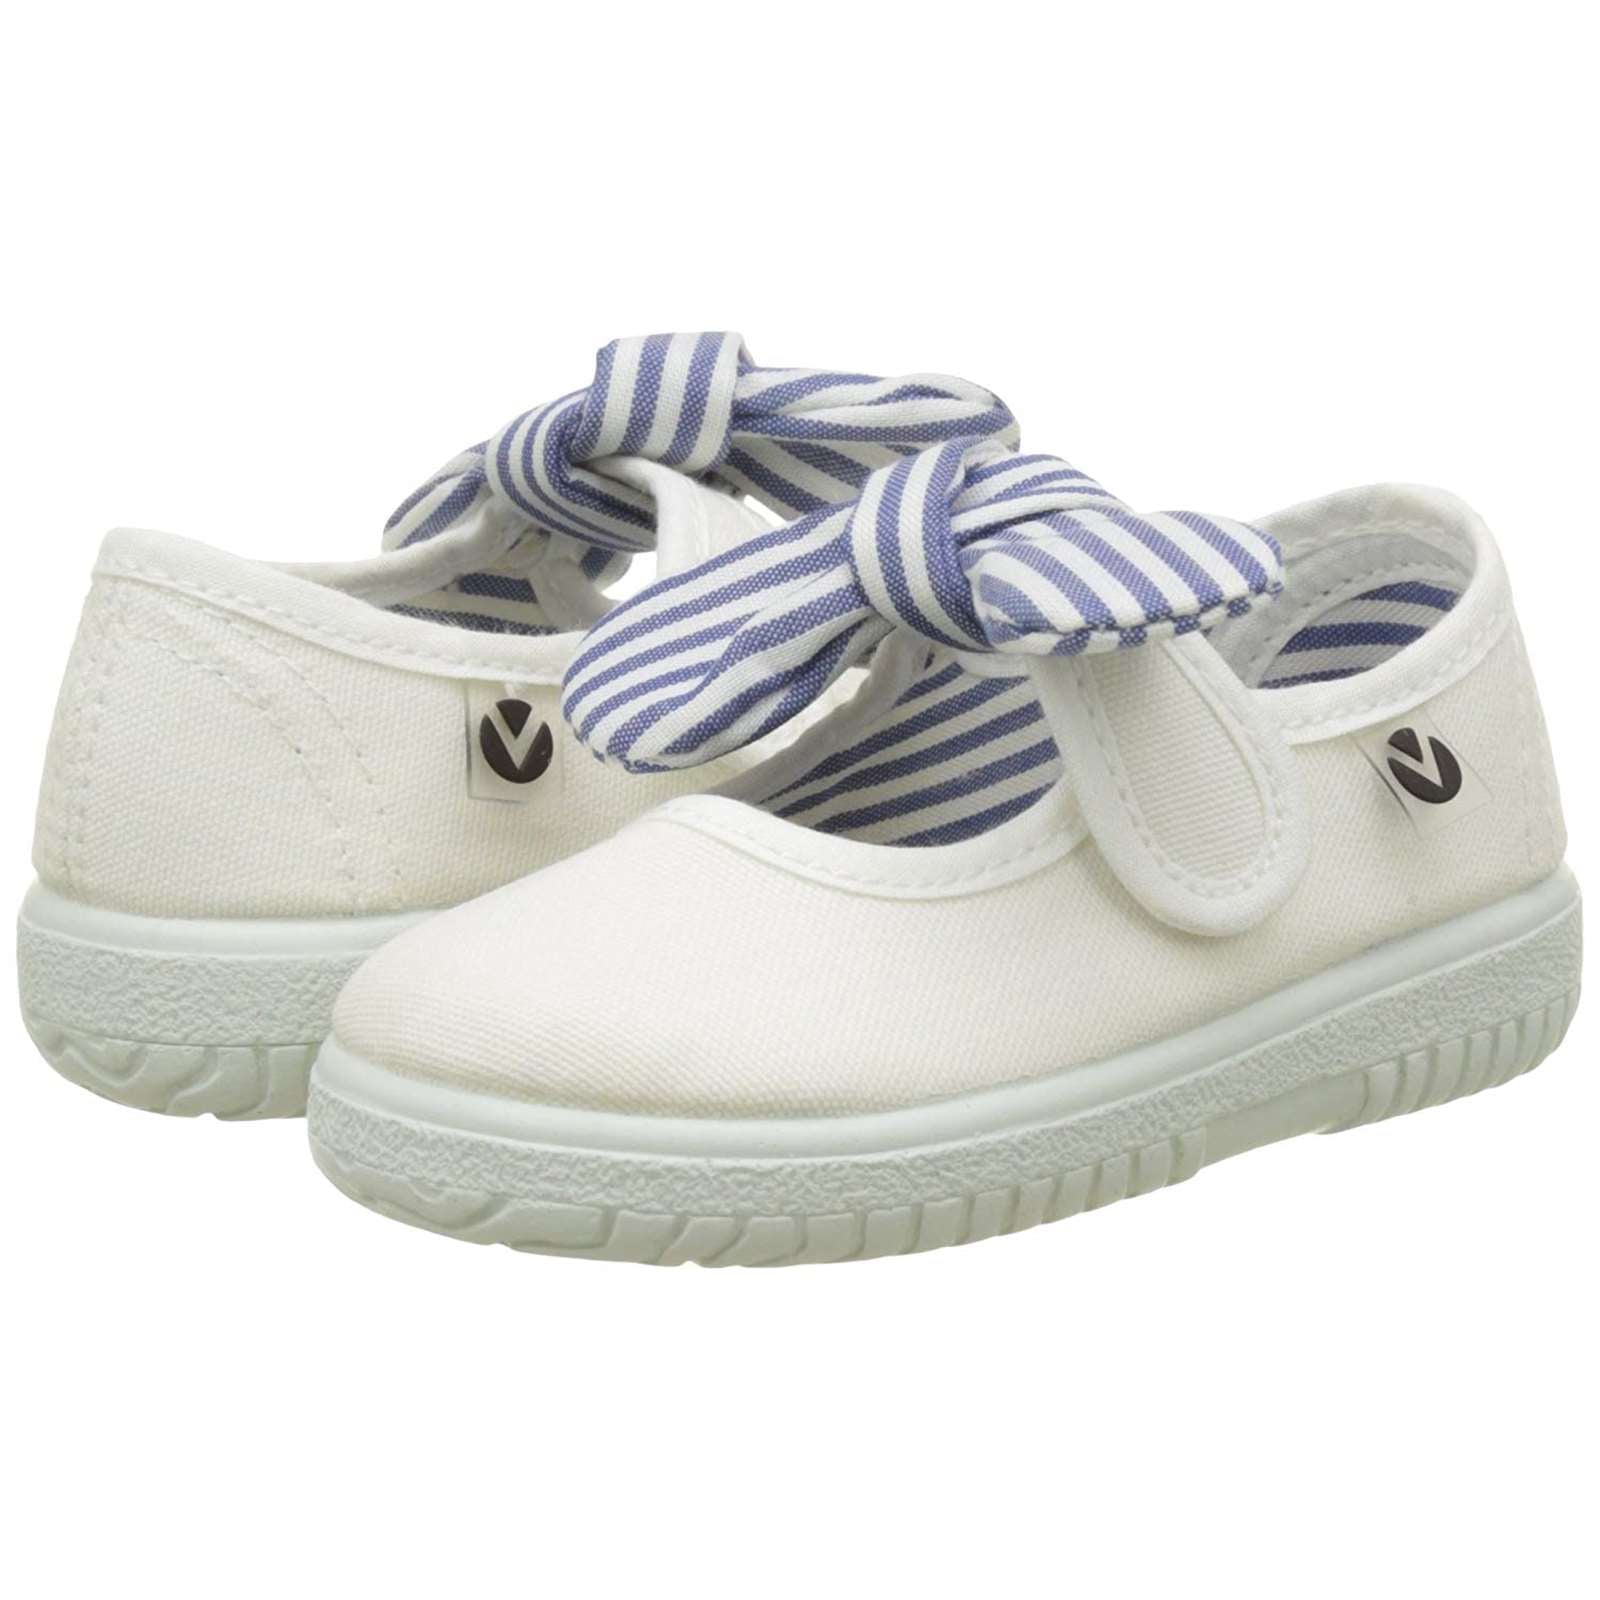 Victoria Toddler Slip On Canvas Bow Shoes